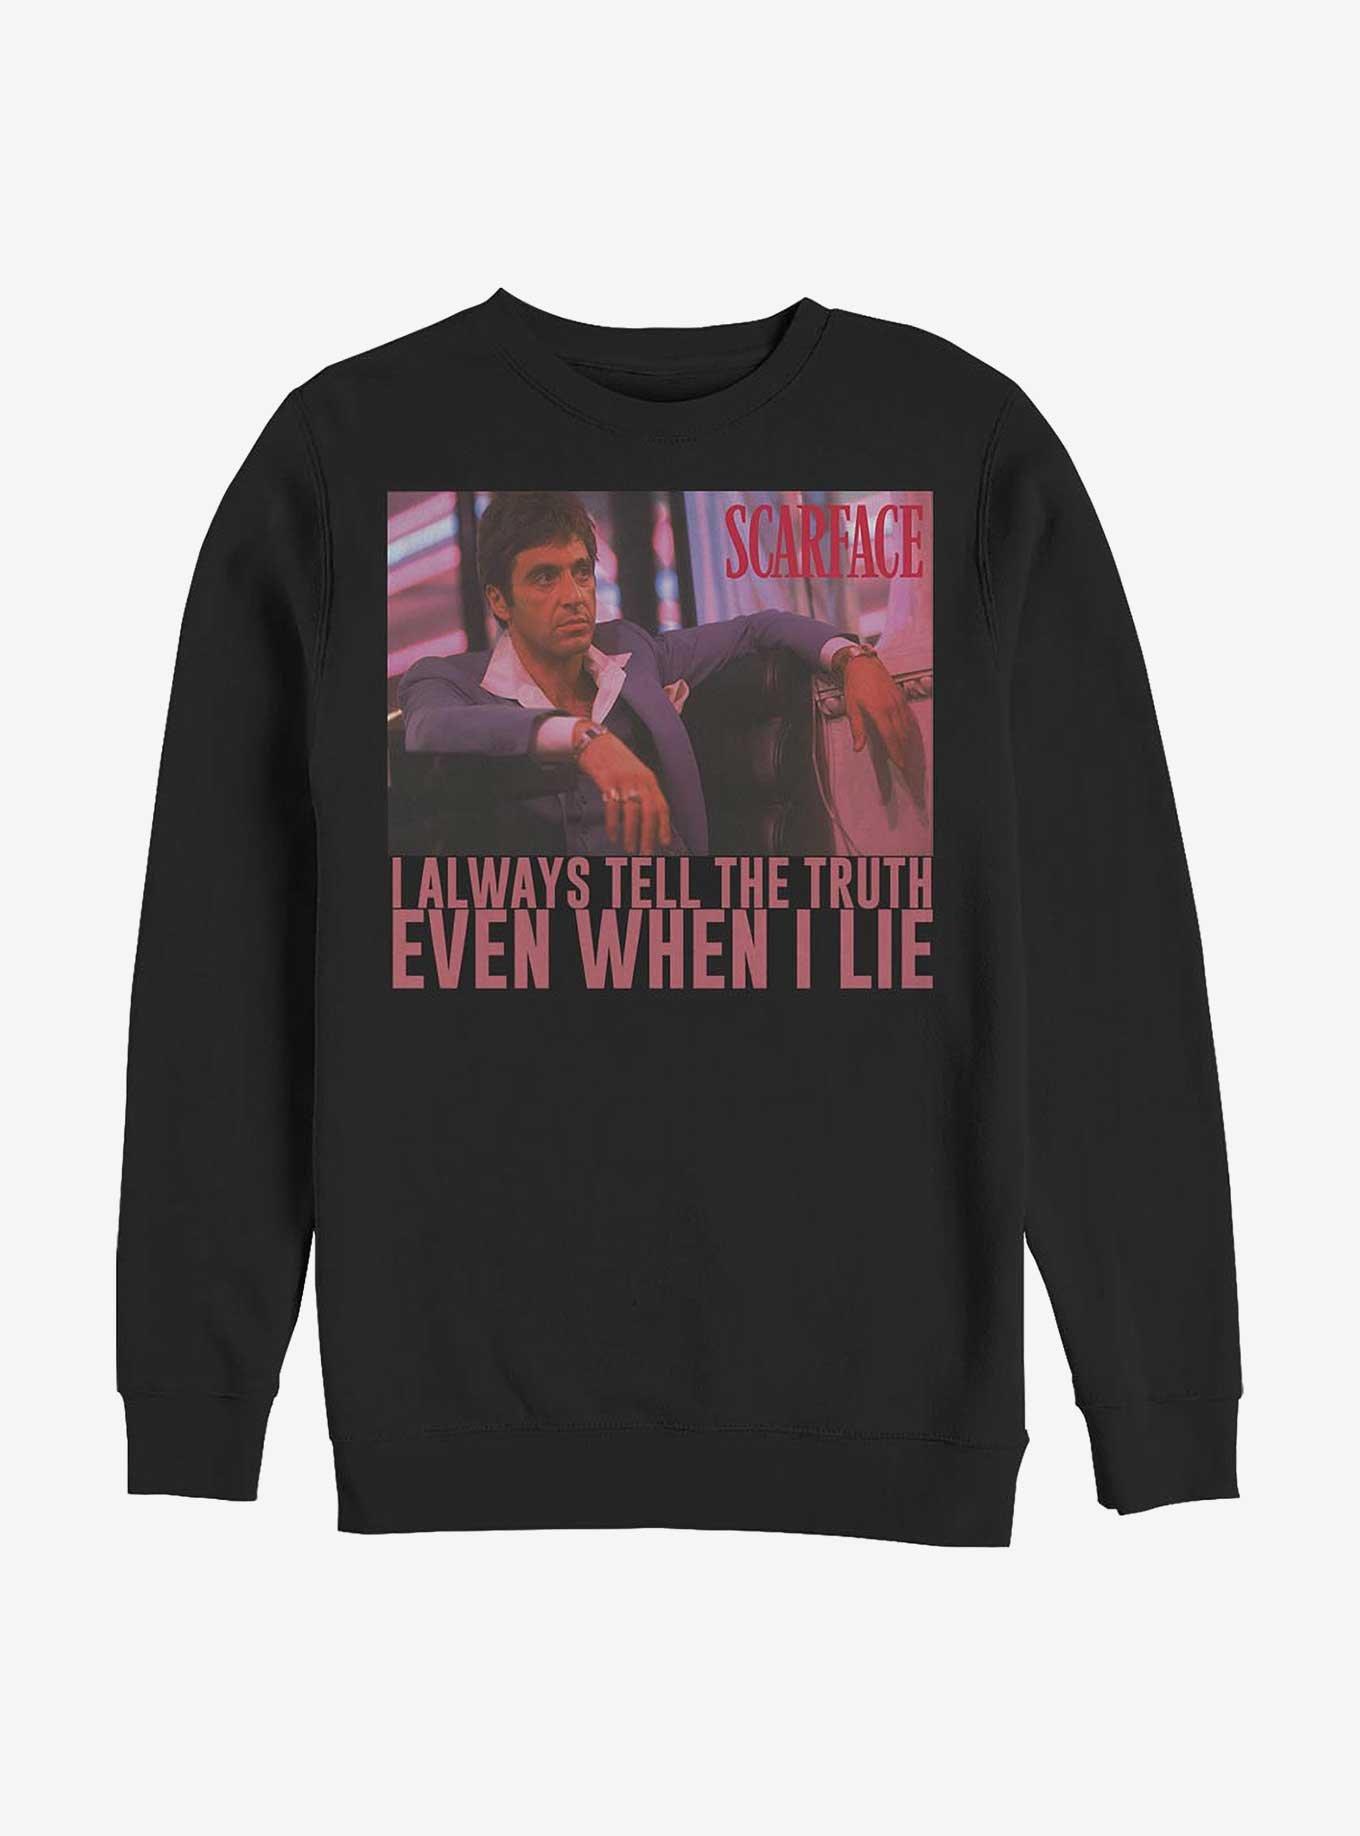 Scarface Always Tell The Truth Even When I Lie Sweatshirt, BLACK, hi-res